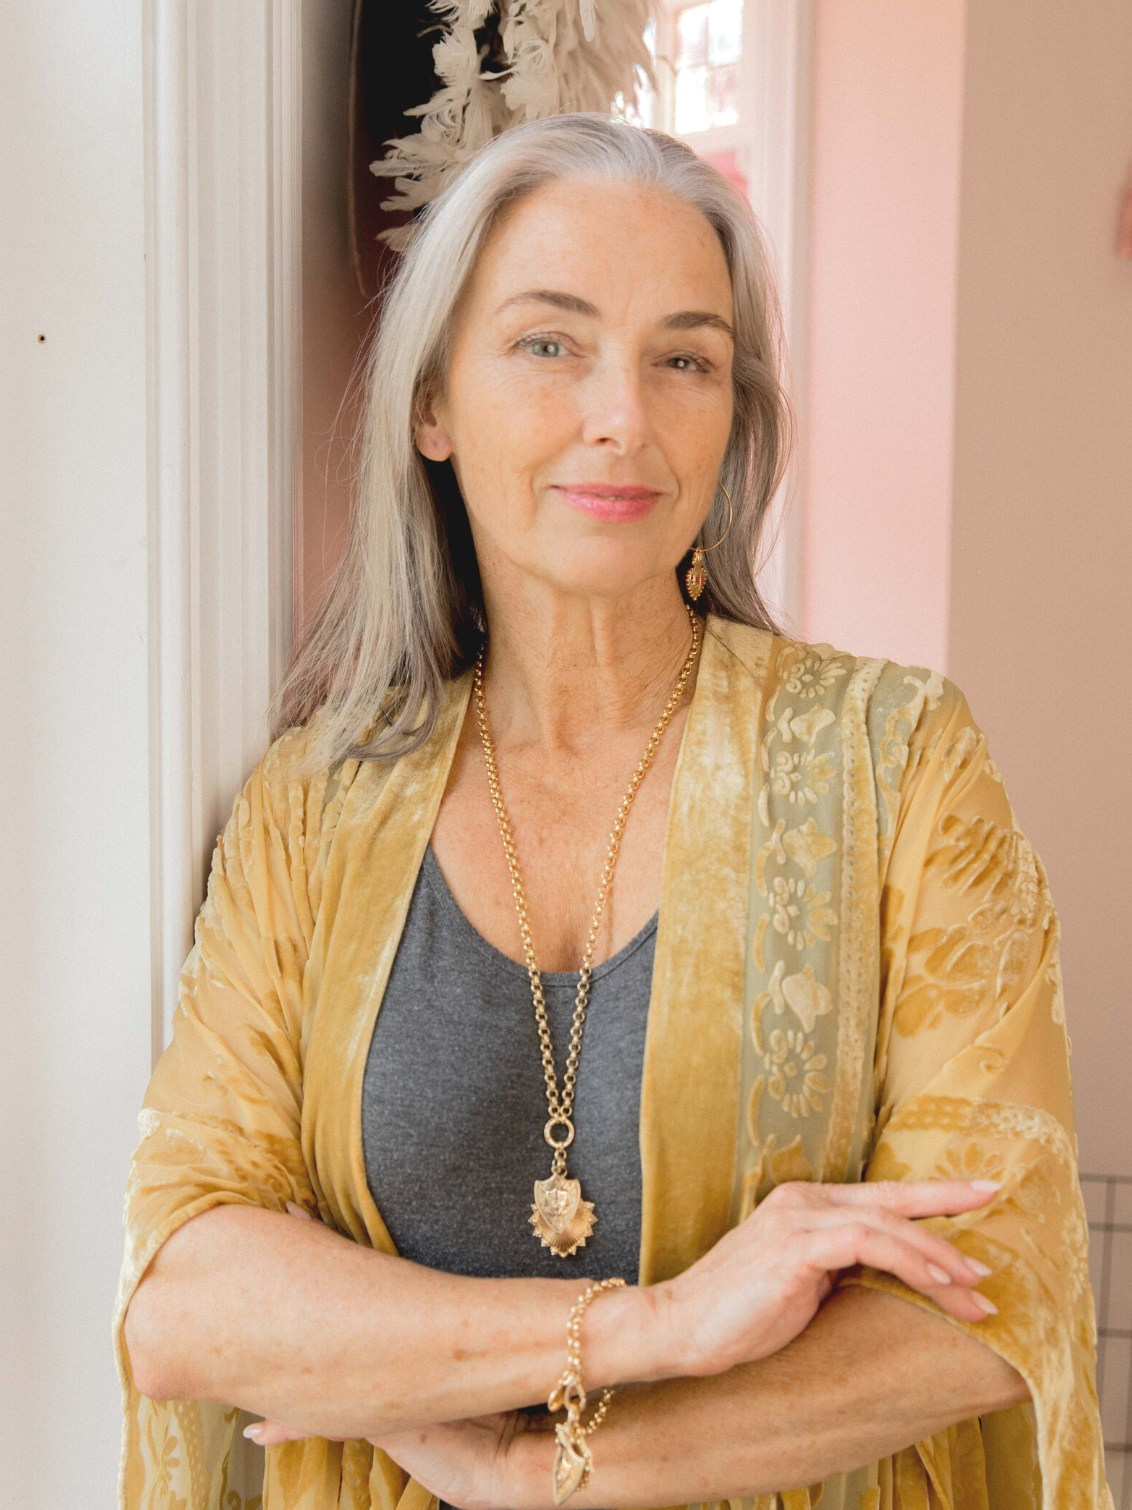 Grey haired woman wearing a yellow kaftan and a gold belcher chain necklace with a gold Joan of Arc shield charm